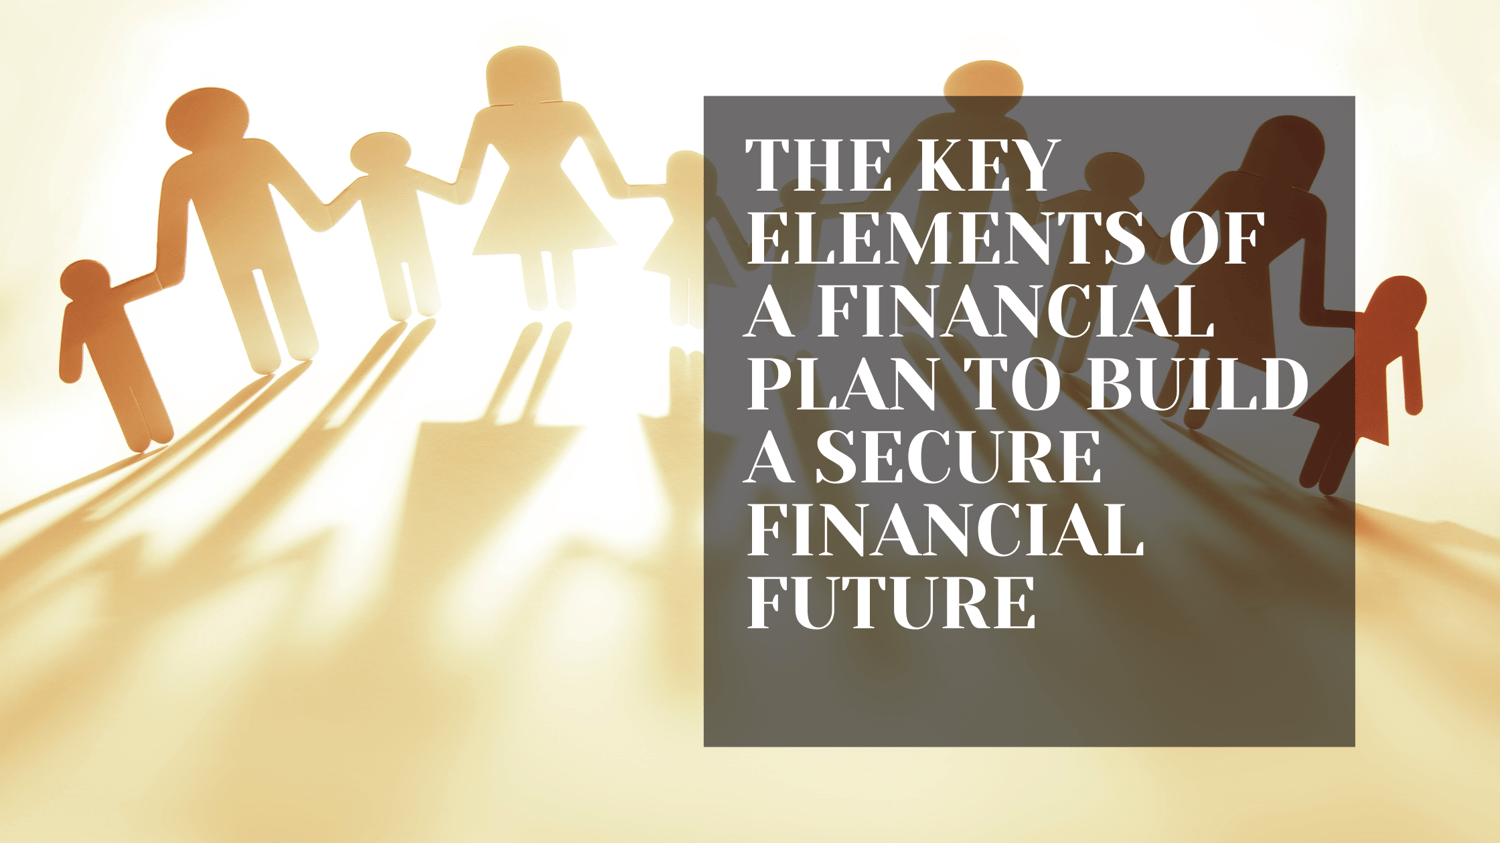 THE KEY ELEMENTS OF A FINANCIAL PLAN TO BUILD A SECURE FINANCIAL FUTURE